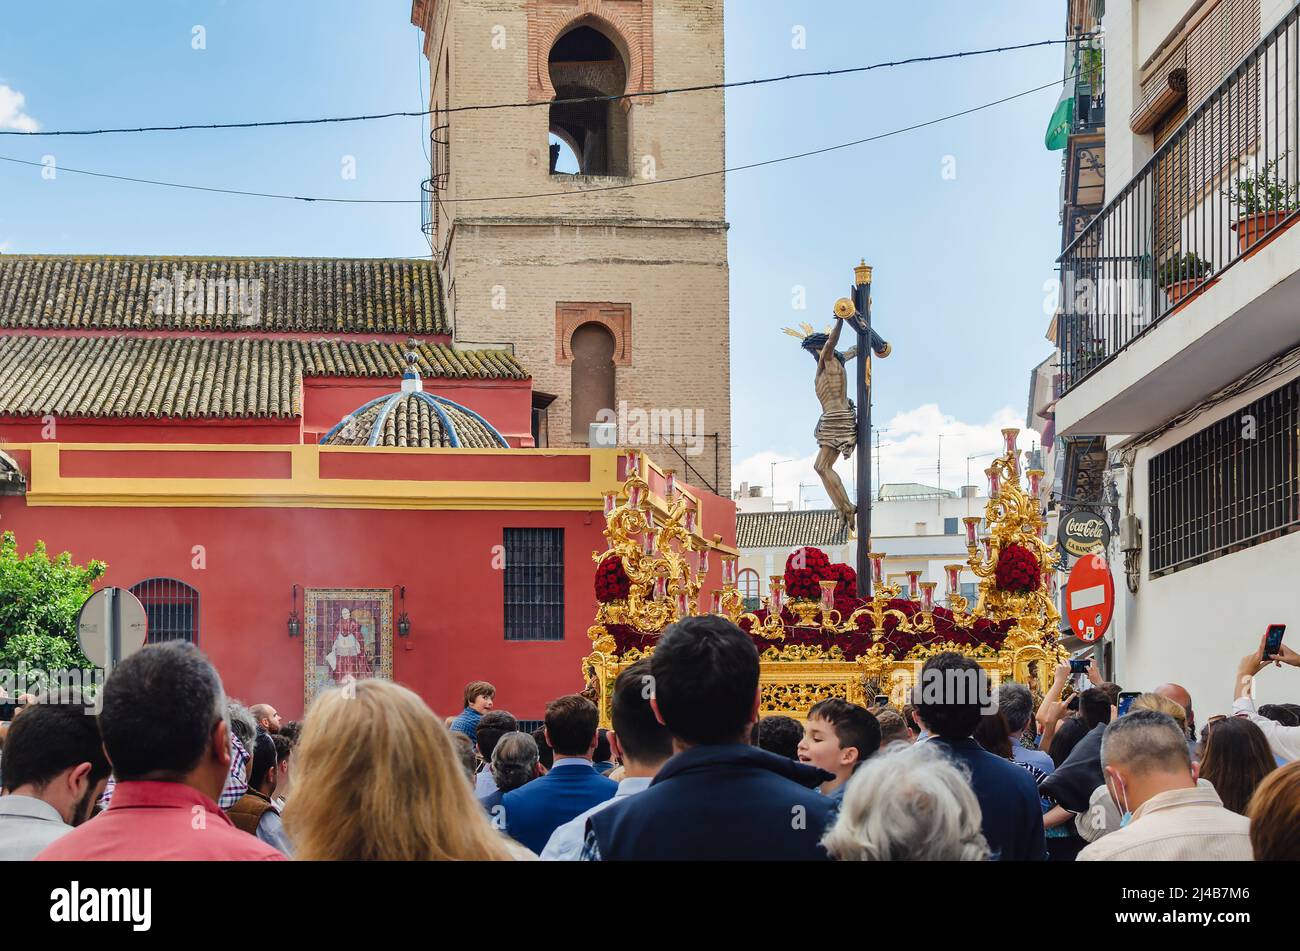 Seville, Spain; April 13, 2022: Procession during the Holy Week in the streets of Seville.  Brotherhood of 'El Buen Fin'.  San Lorenzo Church in the b Stock Photo